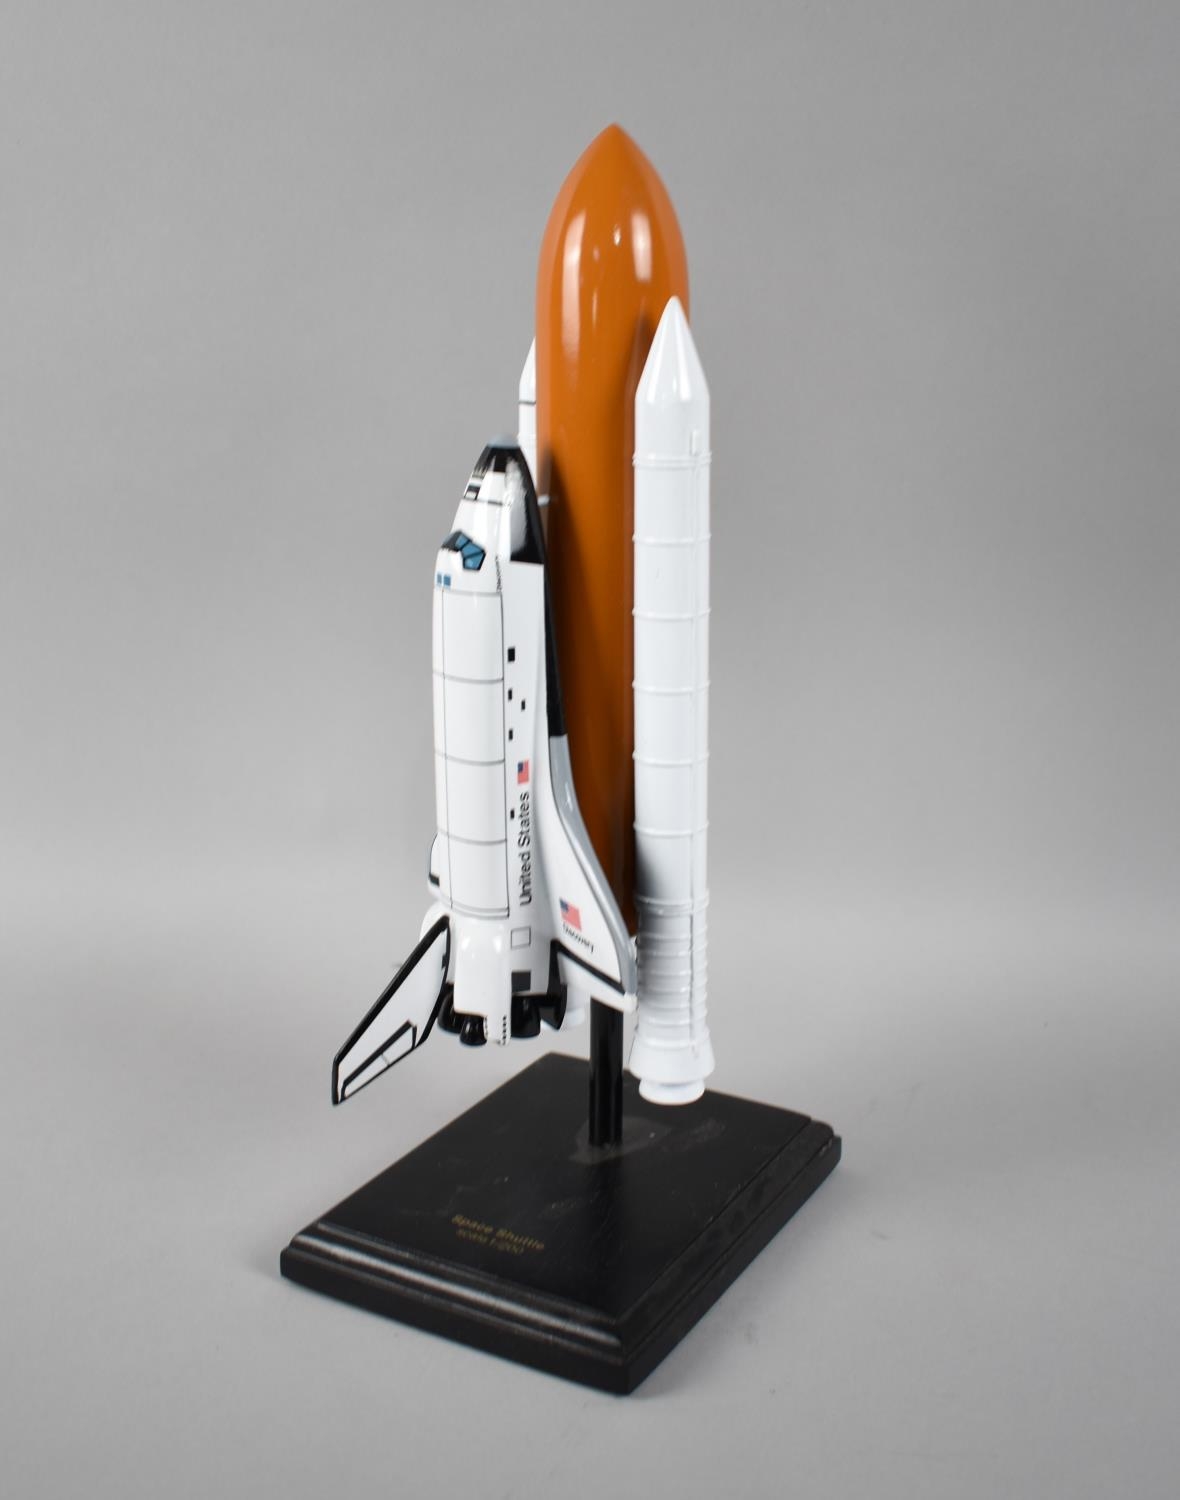 A 1/200 Scale Model of The Space Shuttle on Rectangular Plinth, 33cms High - Image 2 of 2